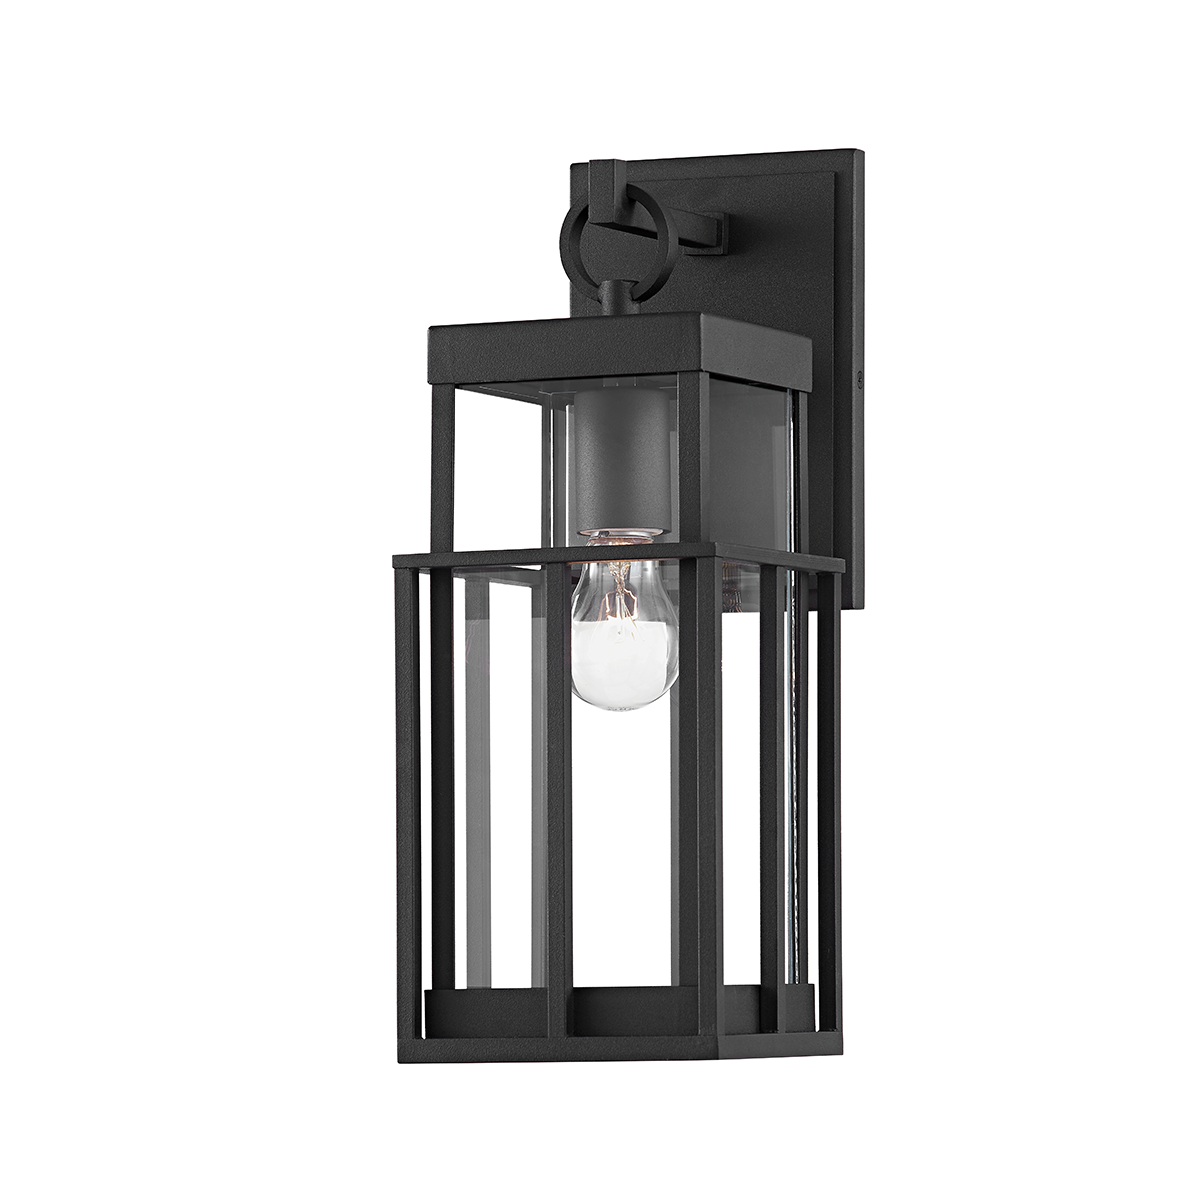 Troy Lighting 1 LIGHT SMALL EXTERIOR WALL SCONCE B6481 Outdoor l Wall Troy Lighting TEXTURE BLACK  